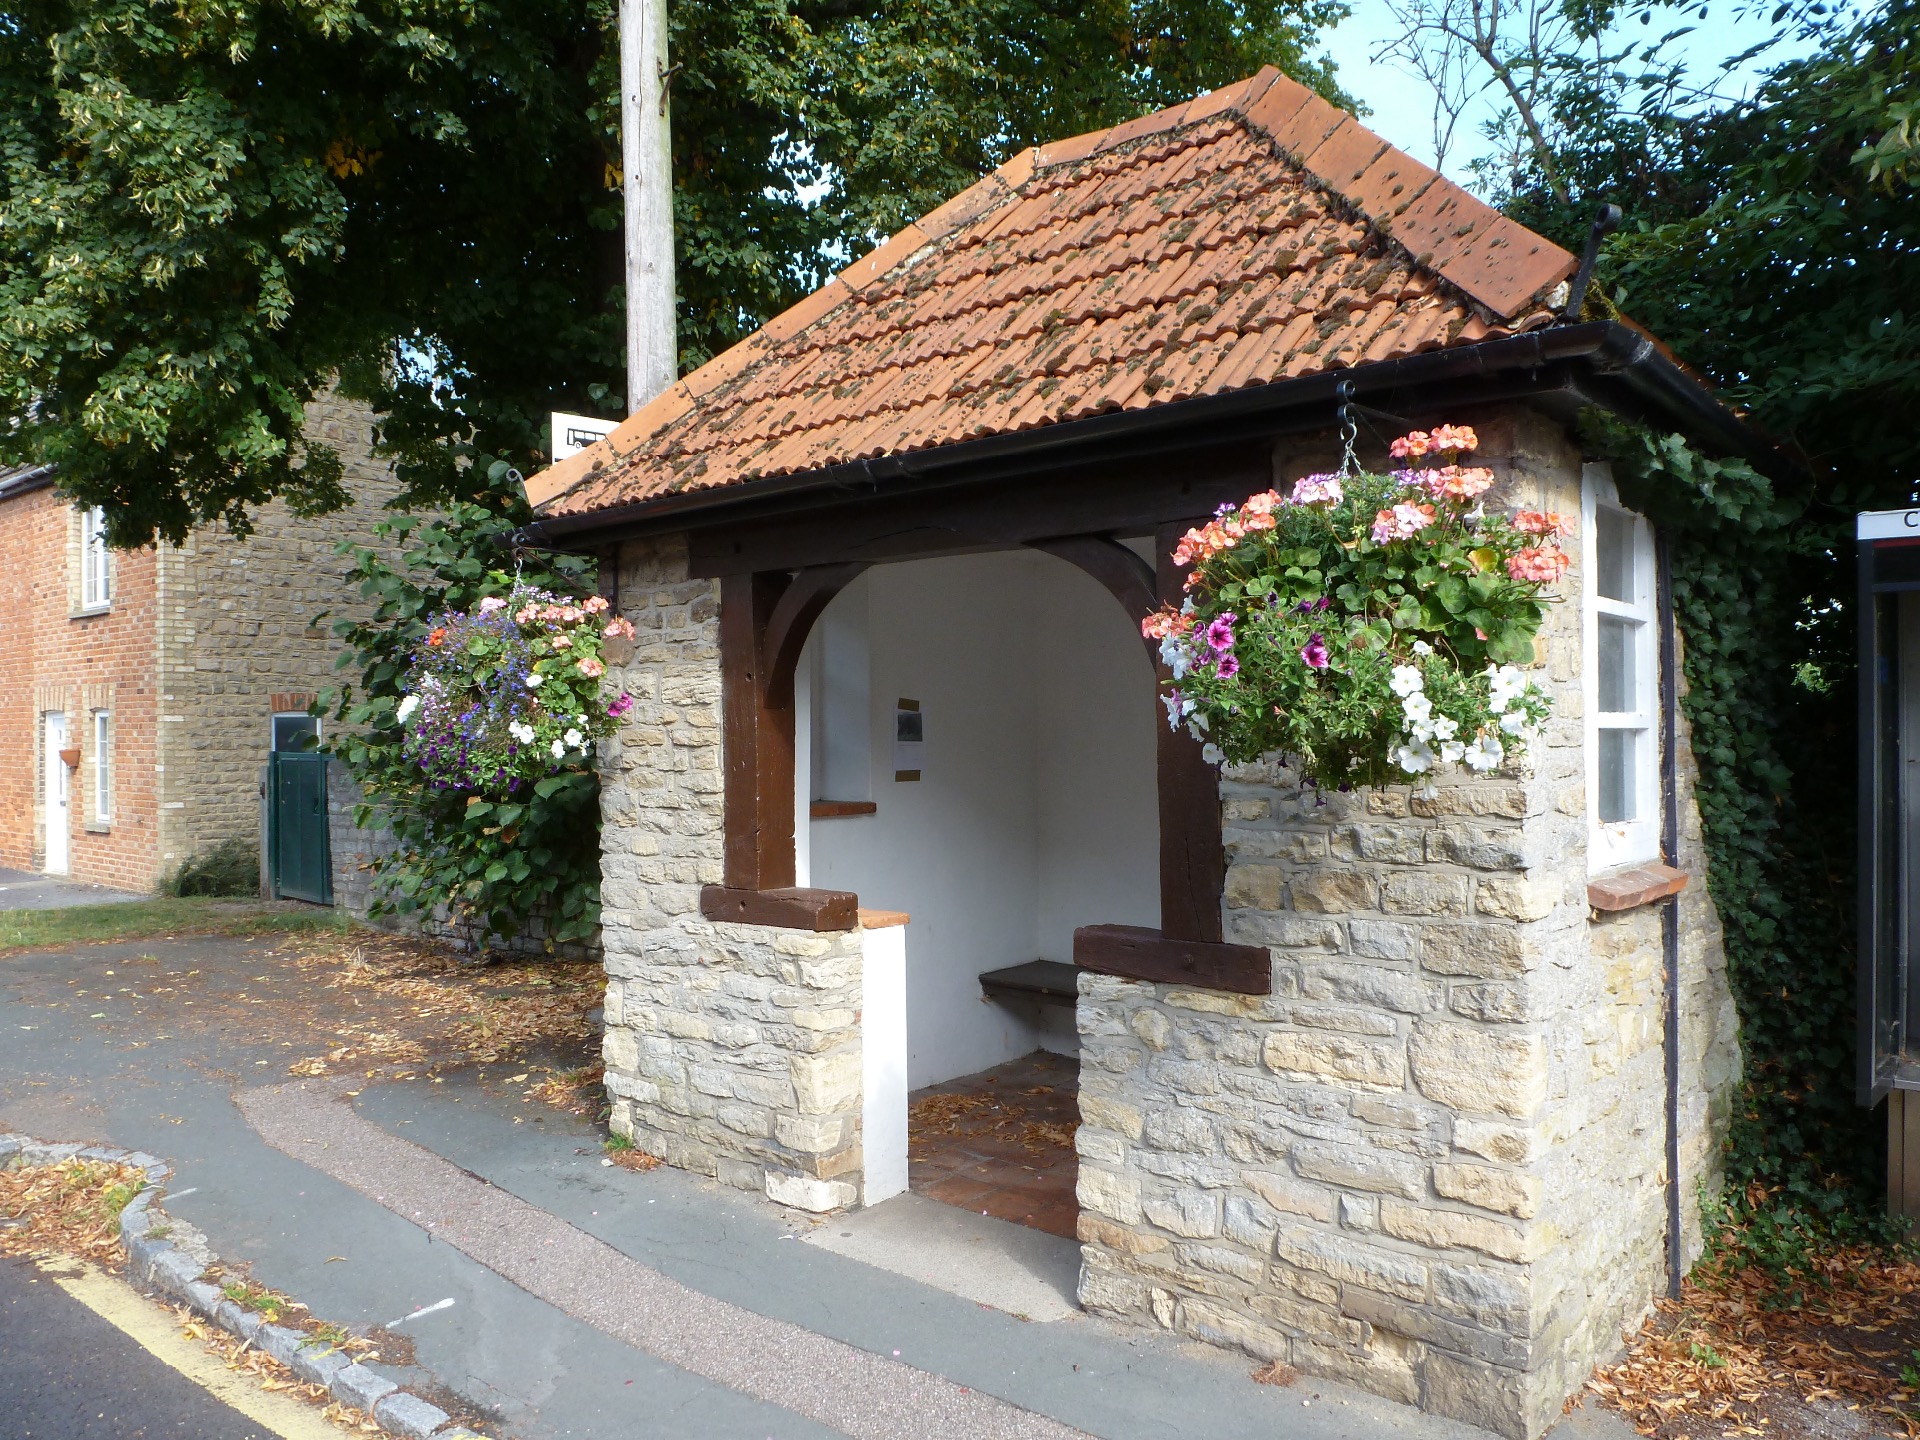 Bus shelter in the High Street